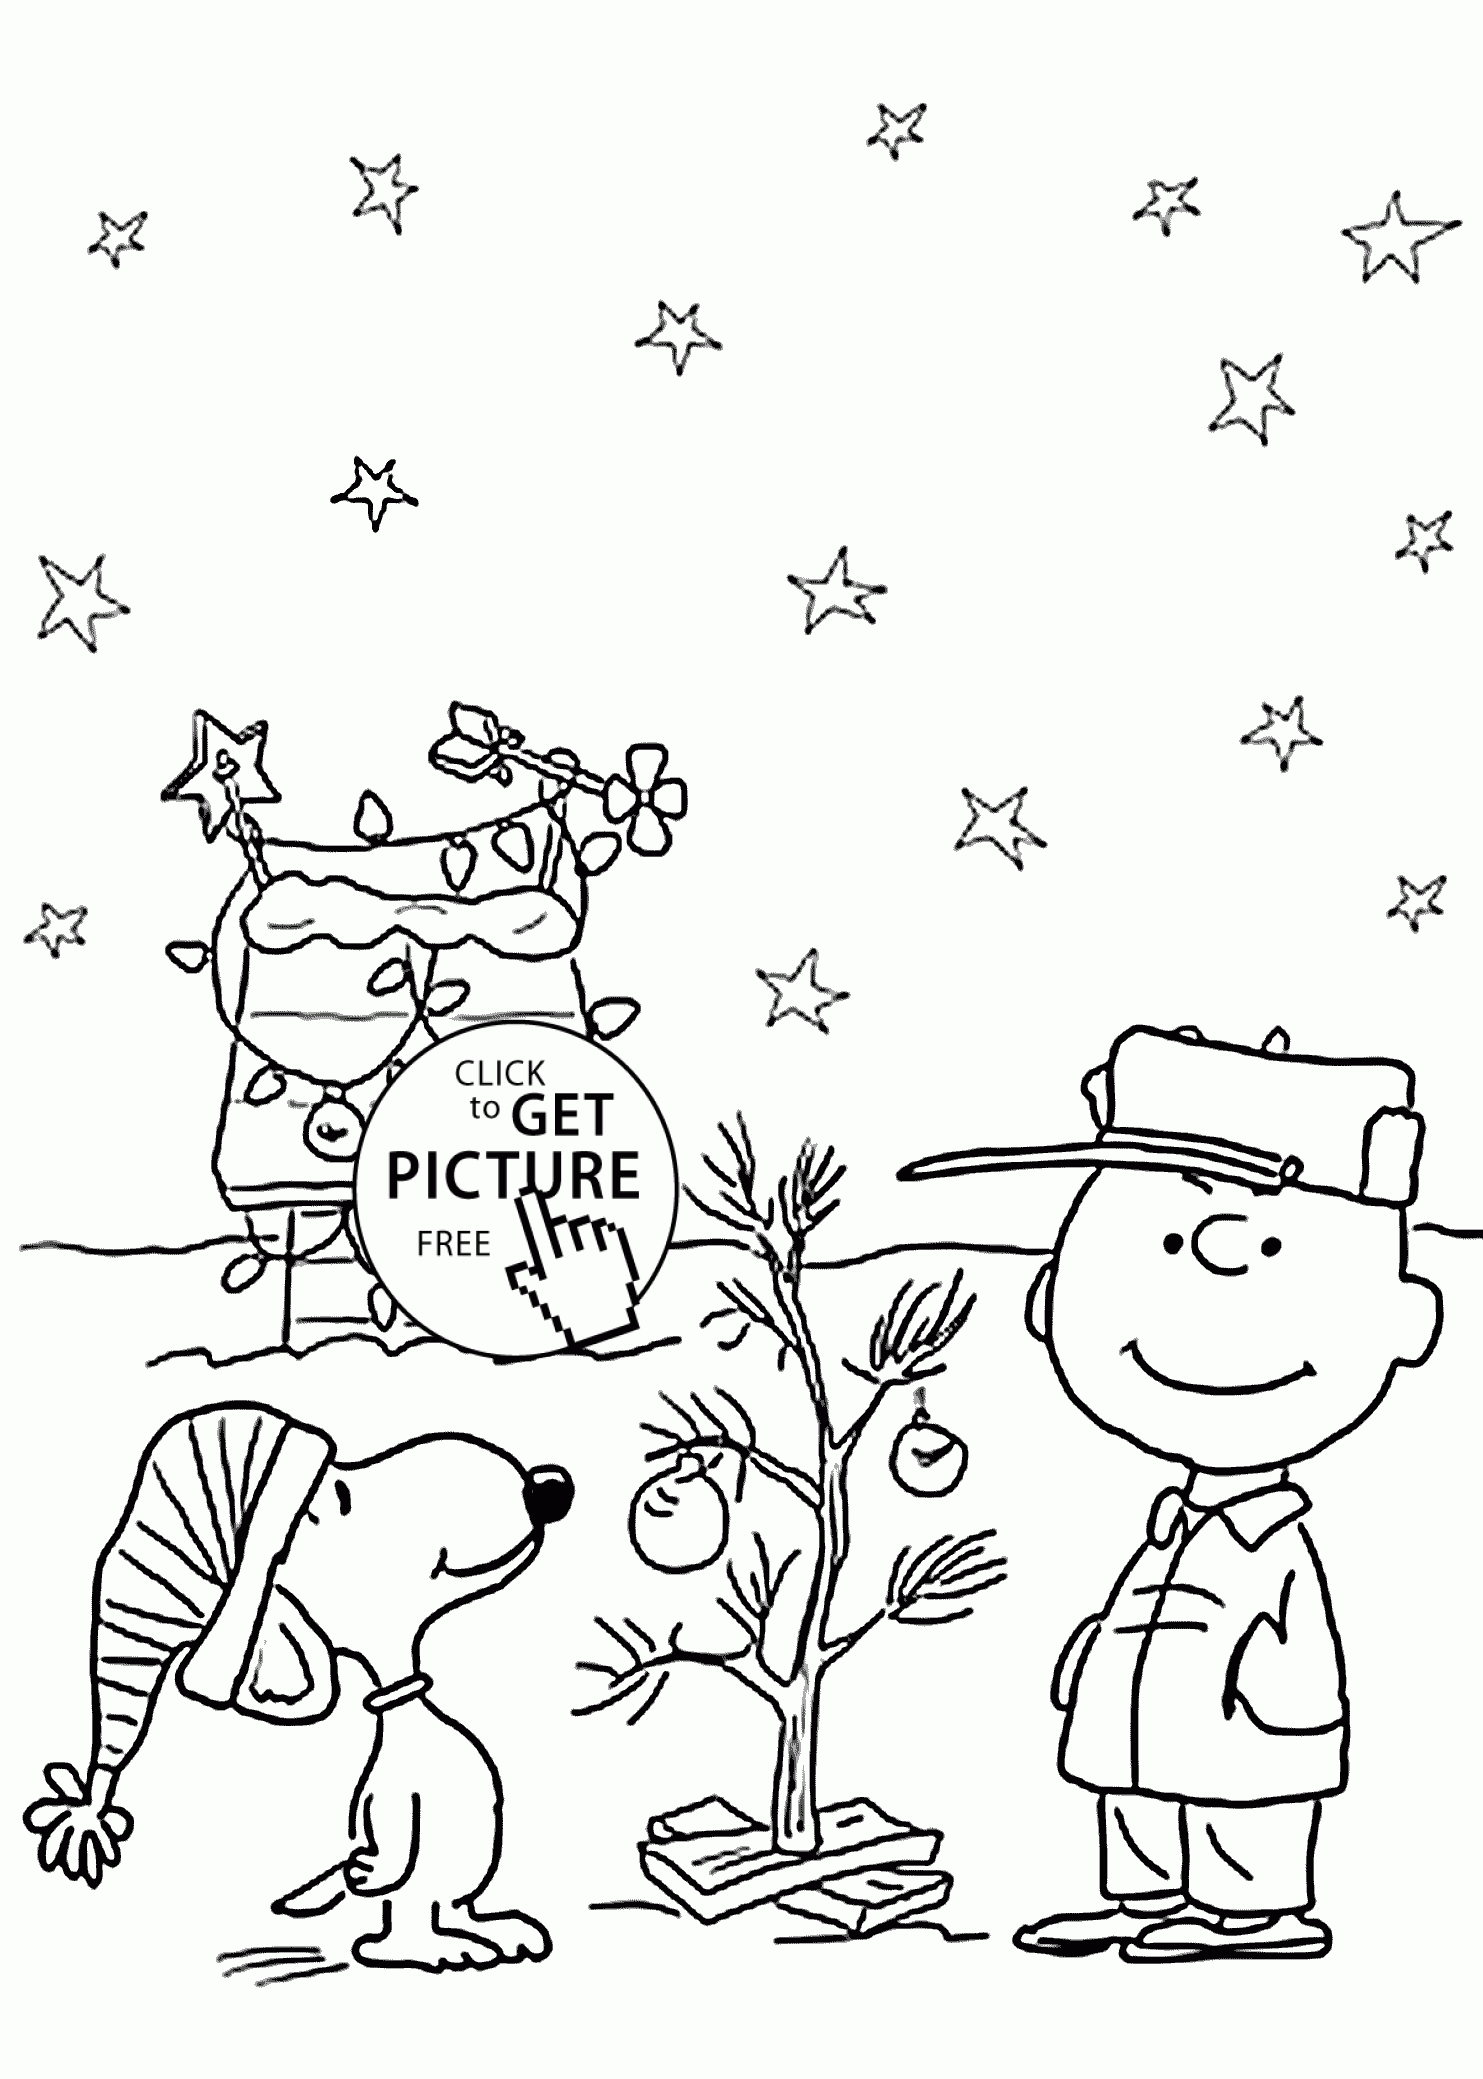 Charlie Brown And Christmas Coloring Pages For Kids, Printable Free - Free Printable Christmas Coloring Pages For Kids